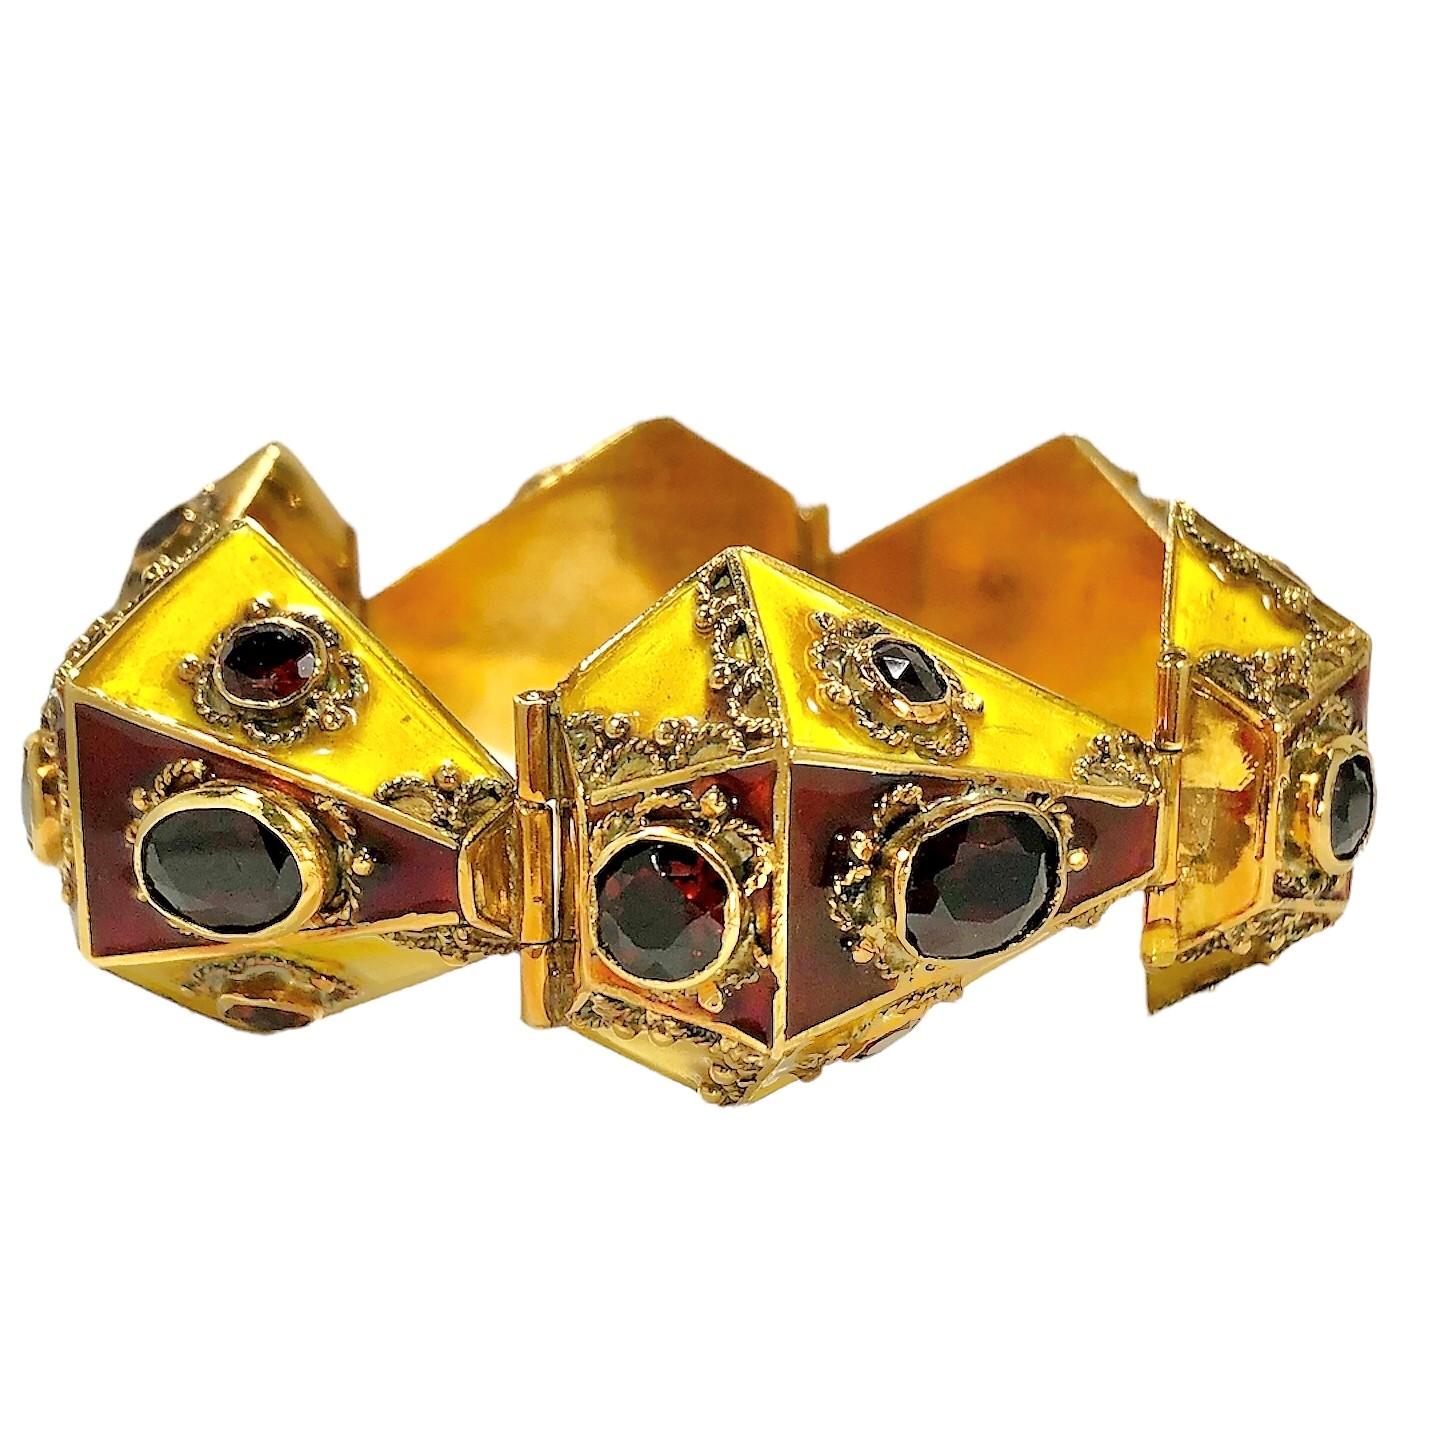 This wonderful and unusual bracelet was crafted in Italy at some time during the Mid-20th Century, While this genre is not at all unusual in charms, pendants and earrings, it is extremely rare to find bracelets made in this style. The piece is